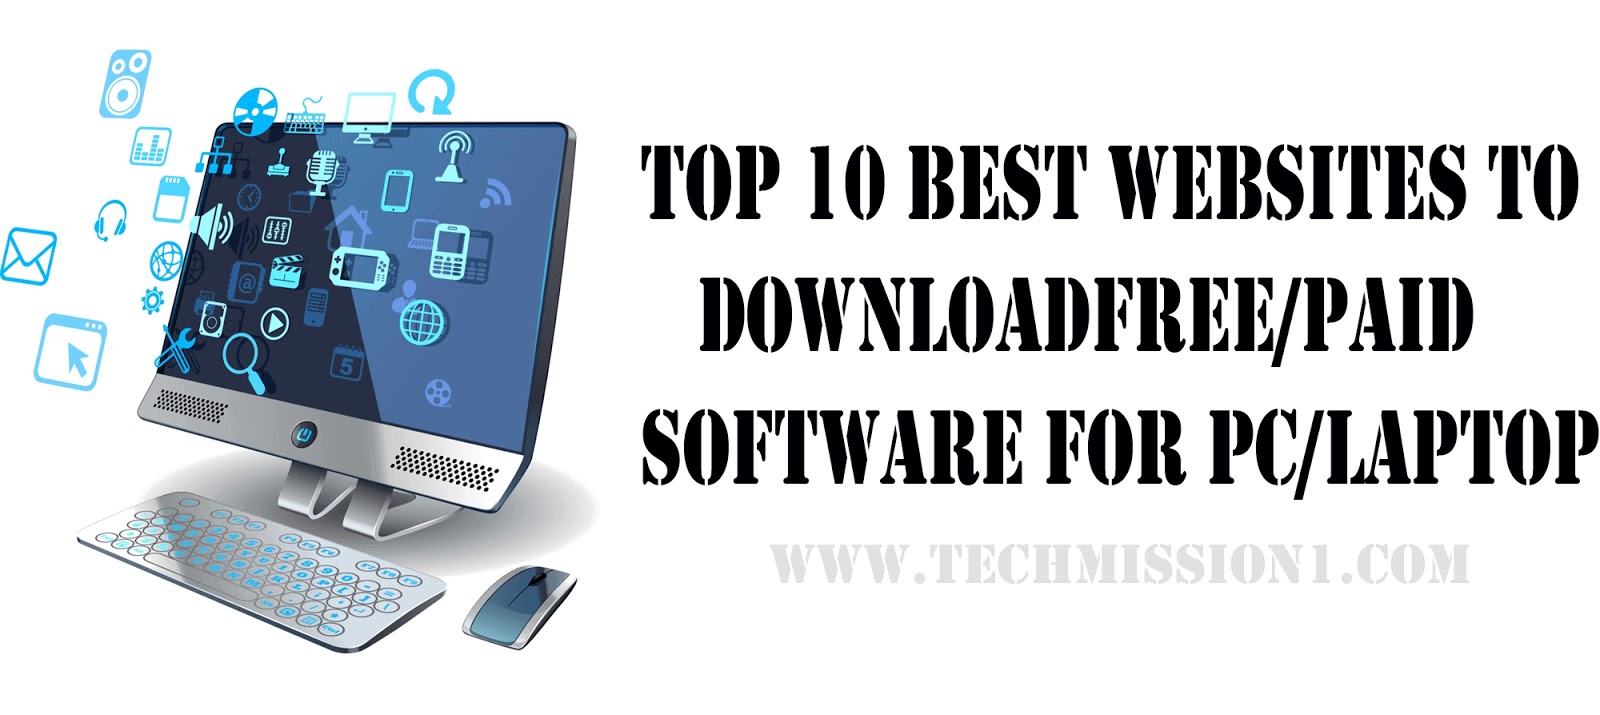 All software downloads for laptop